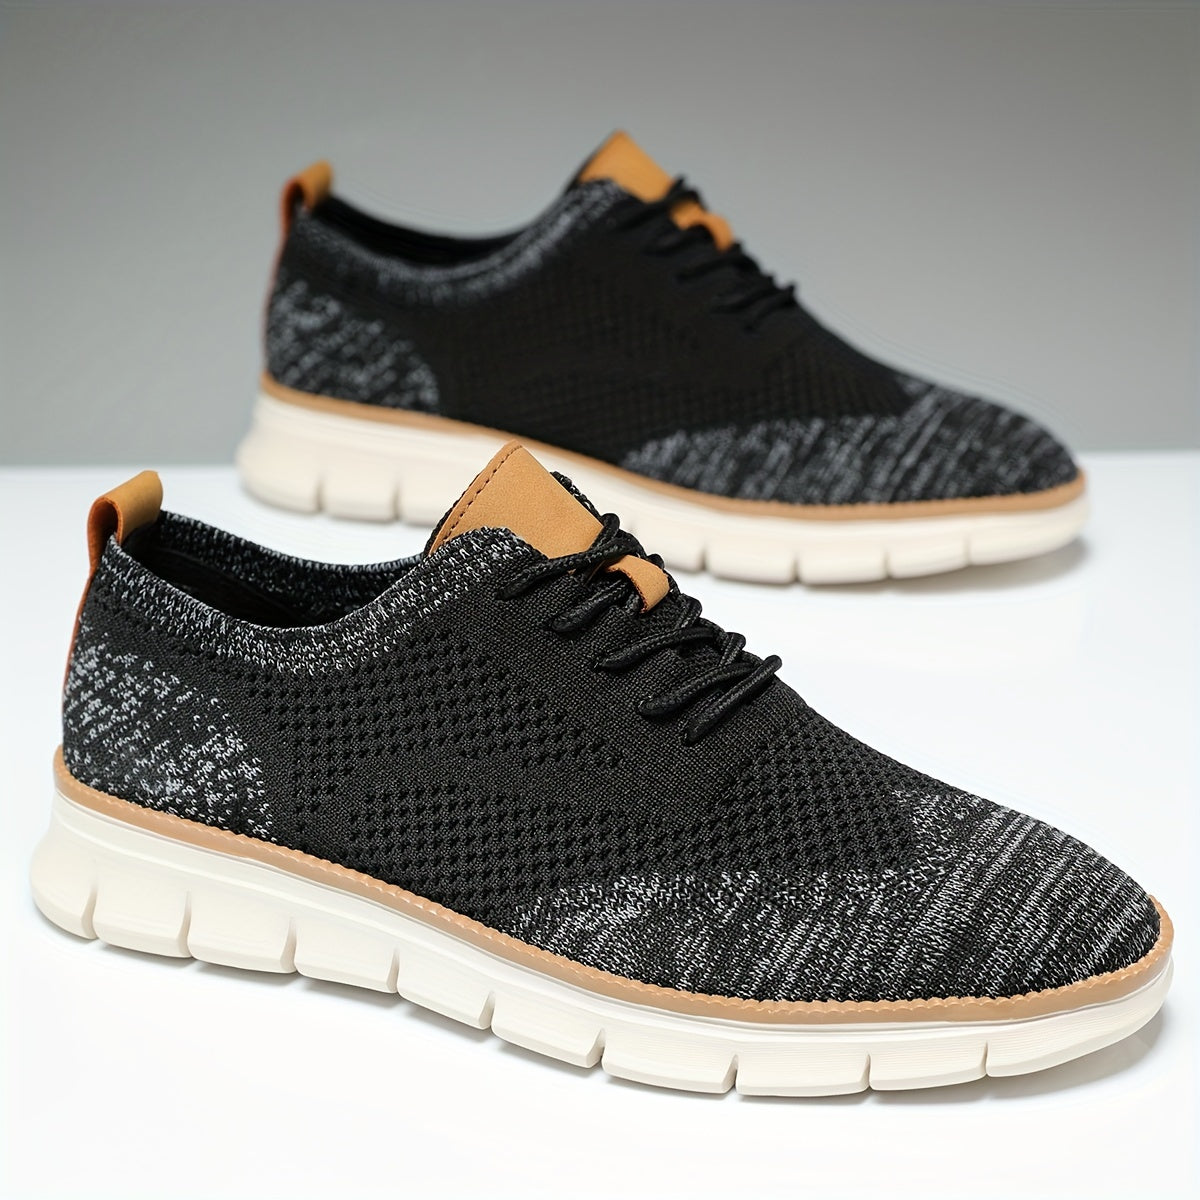 Men's Trendy Woven Knit Breathable Sneakers, Comfy Non Slip Casual Lace Up Shoes For Men's Outdoor Activities